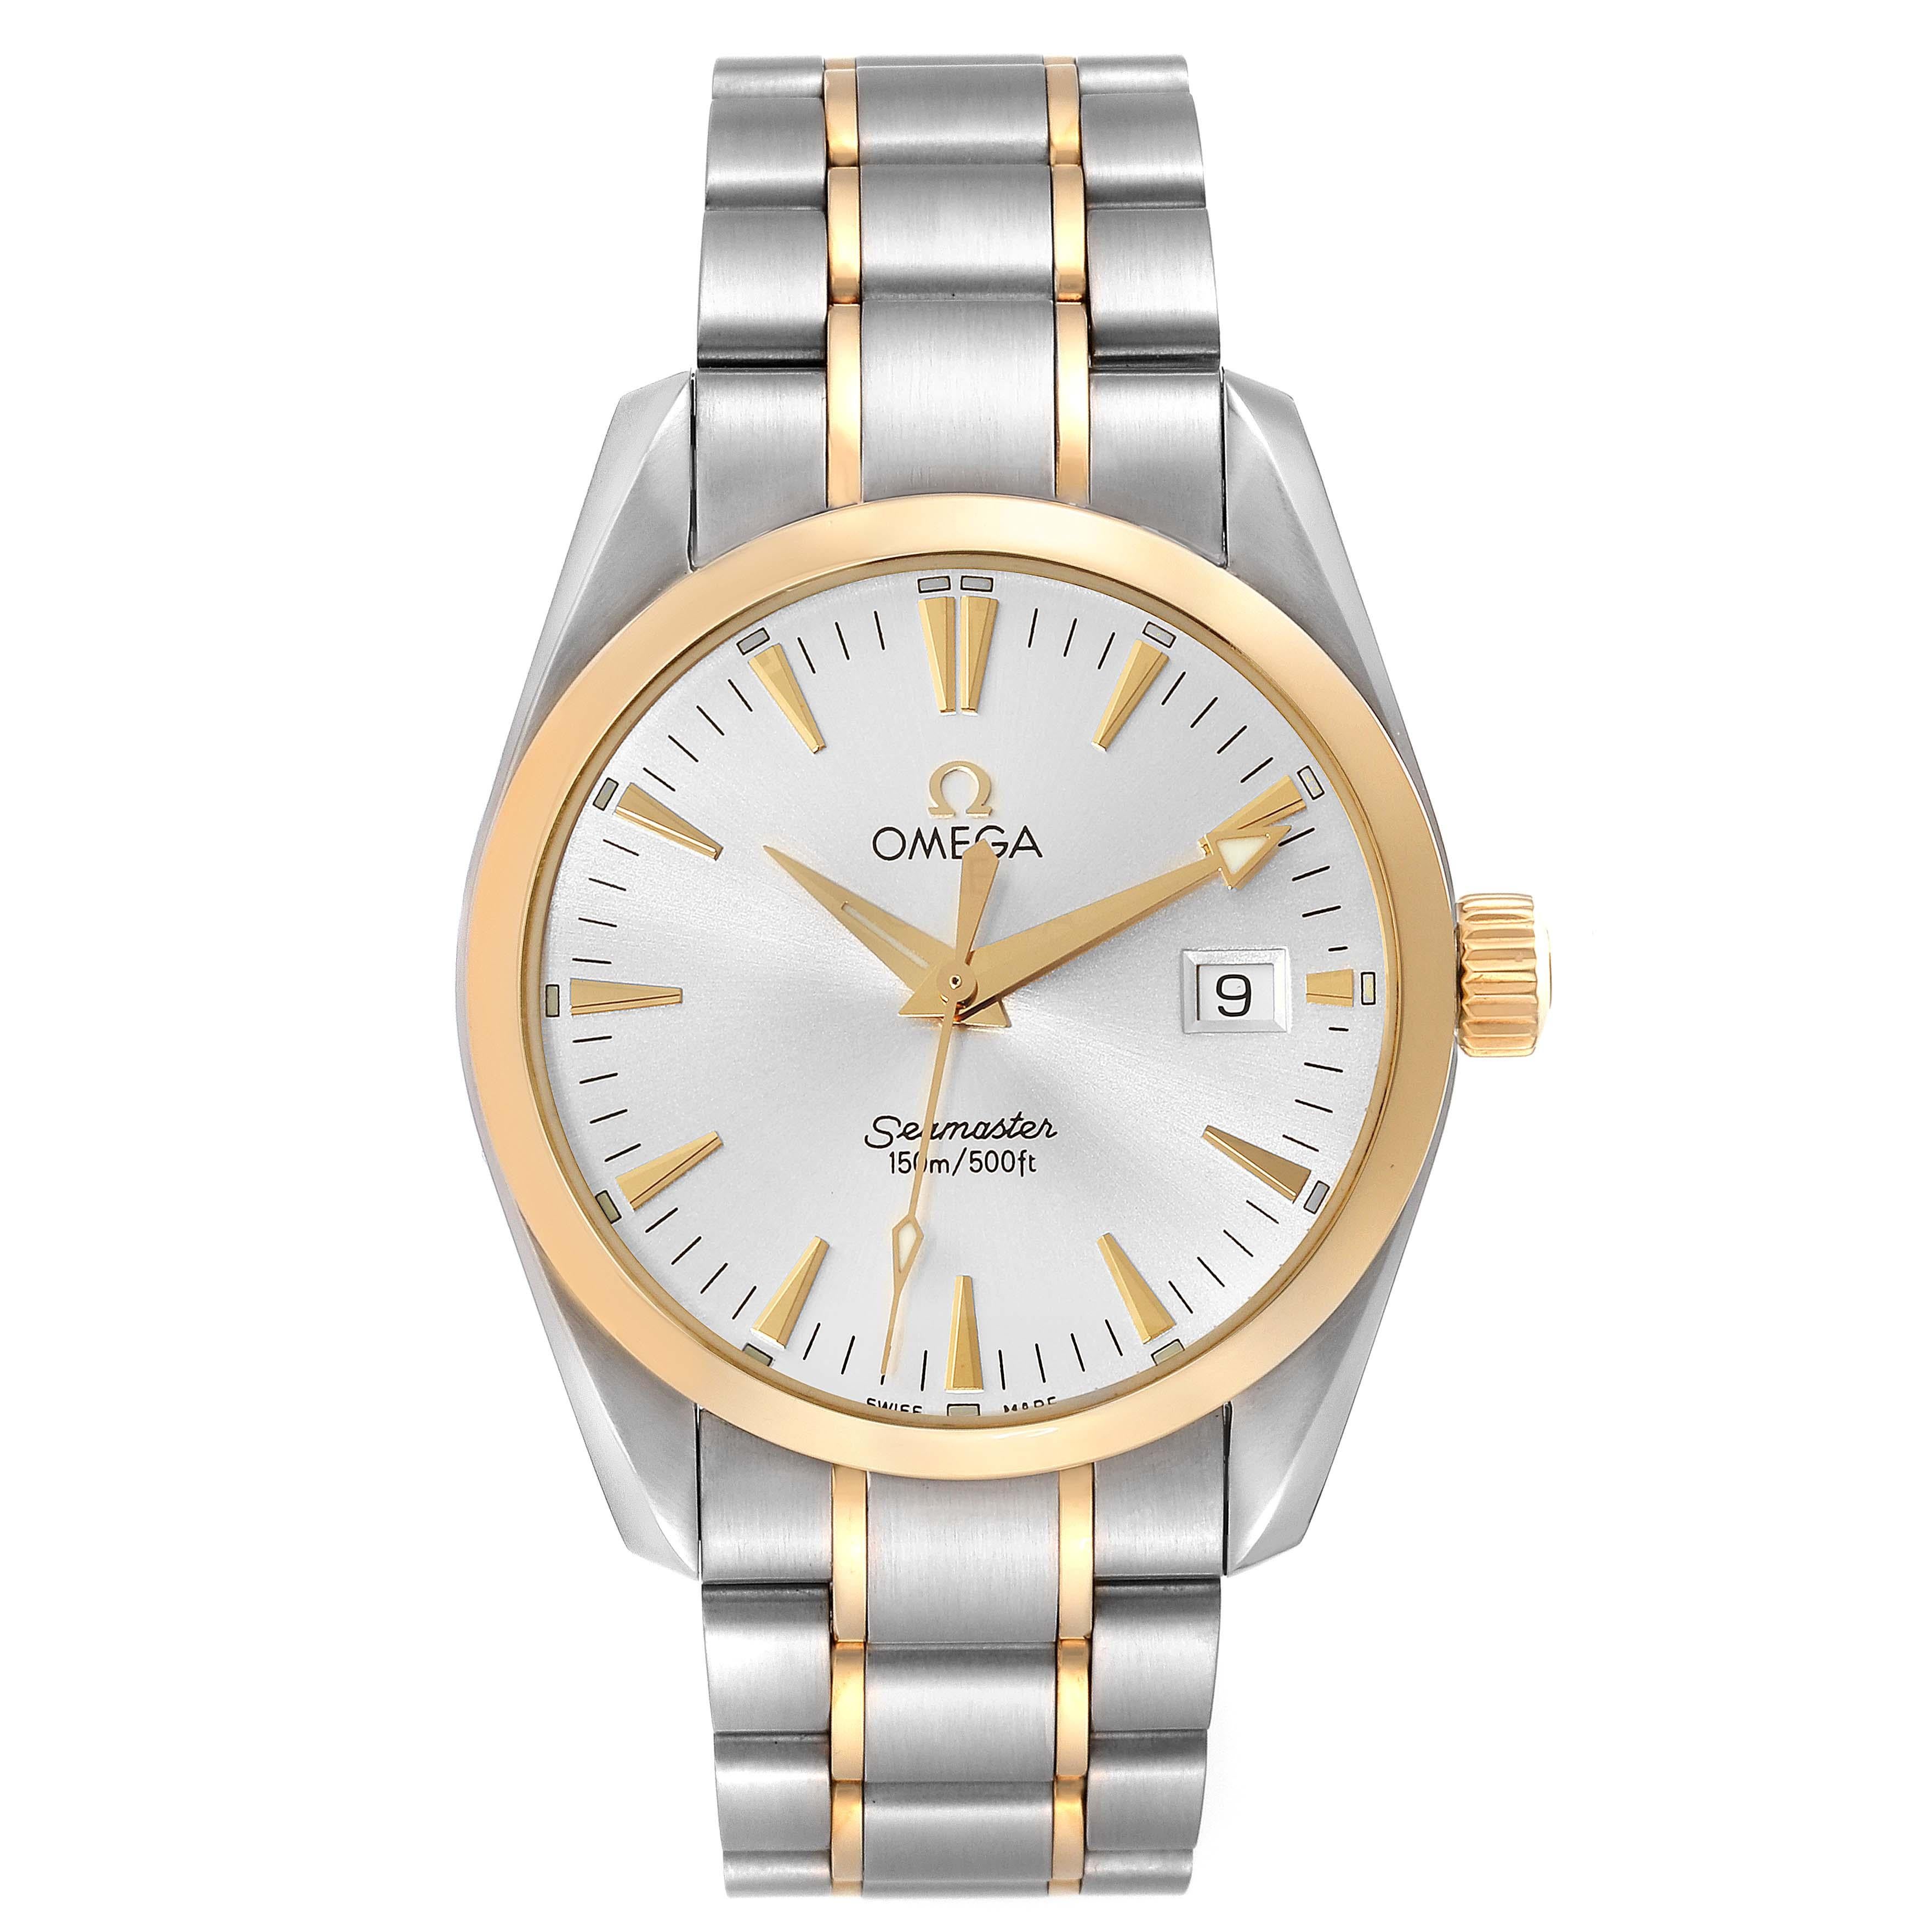 Omega Seamaster Aqua Terra Midsize Steel Yellow Gold Mens Watch 2318.30.00. Quartz precision movement with rhodium-plated finish. Stainless steel and 18k yellow gold round case 36.2 mm in diameter. 18k yellow gold smooth bezel. Scratch resistant